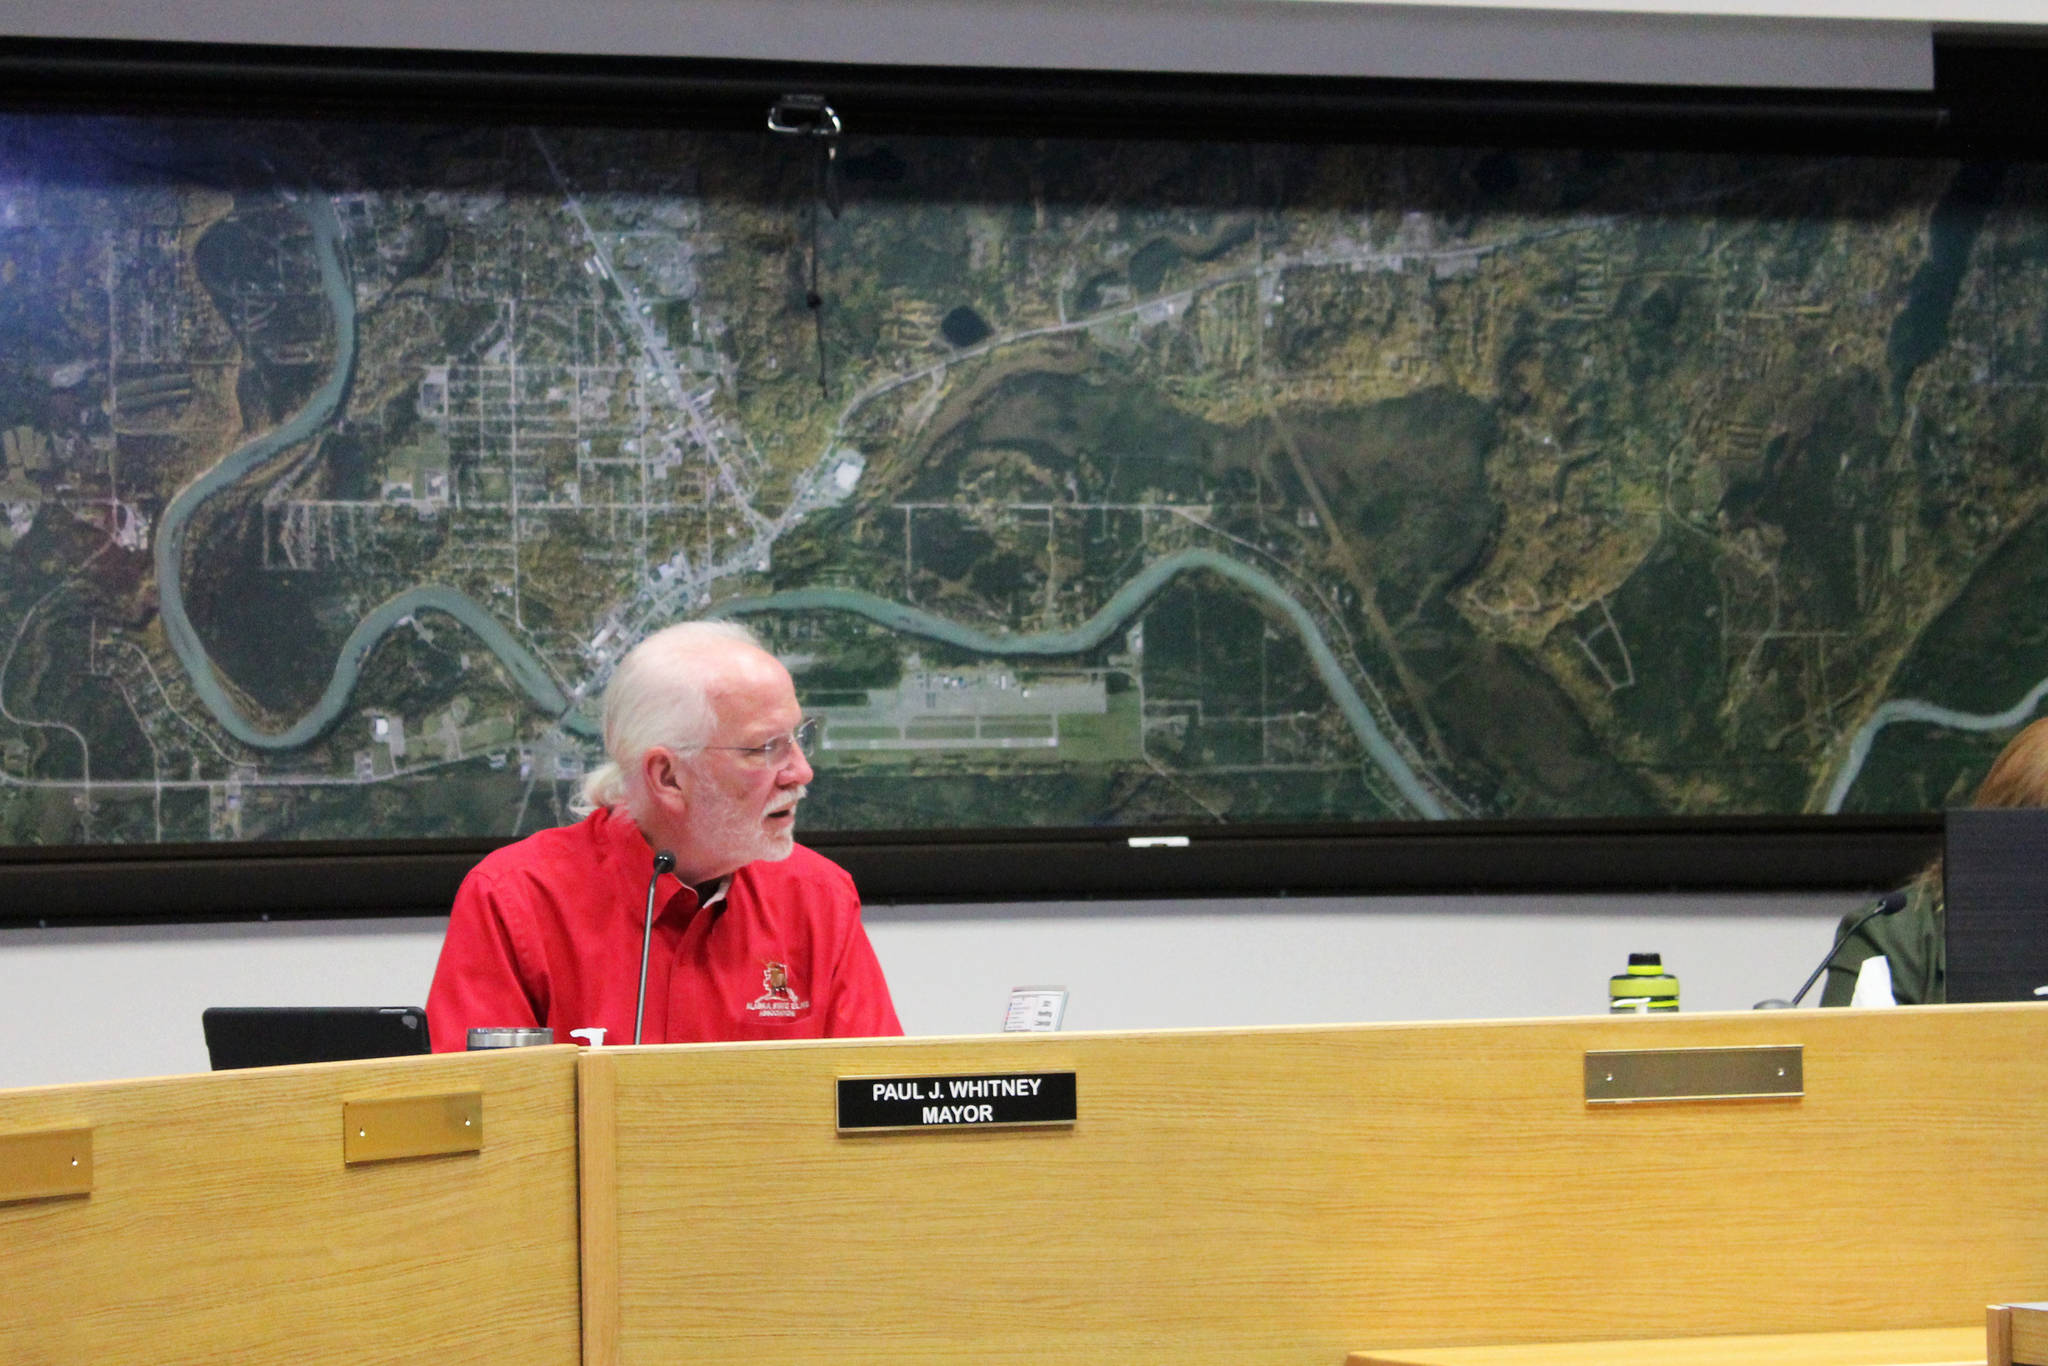 Soldotna Mayor Paul Whitney speaks at a meeting of the Soldotna City Council on Wednesday, Aug. 11, 2021 in Soldotna, Alaska. (Ashlyn O’Hara/Peninsula Clarion)